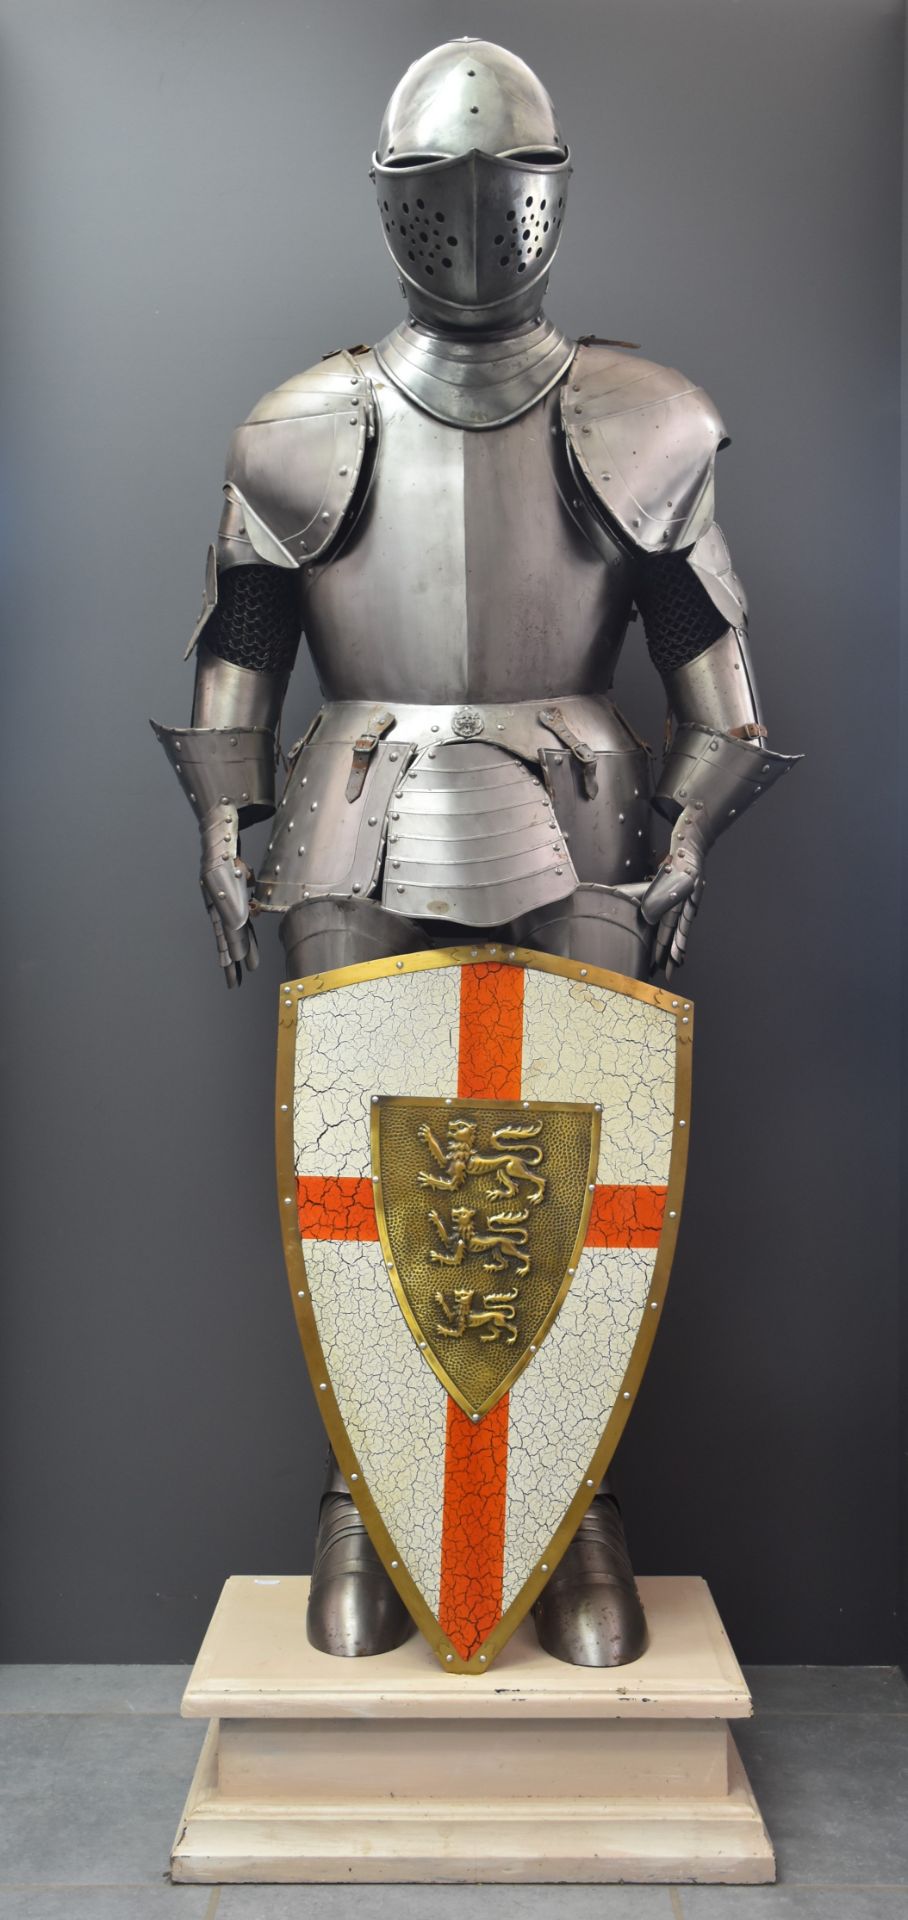 Medieval style armor, made in the middle of the 20th century.